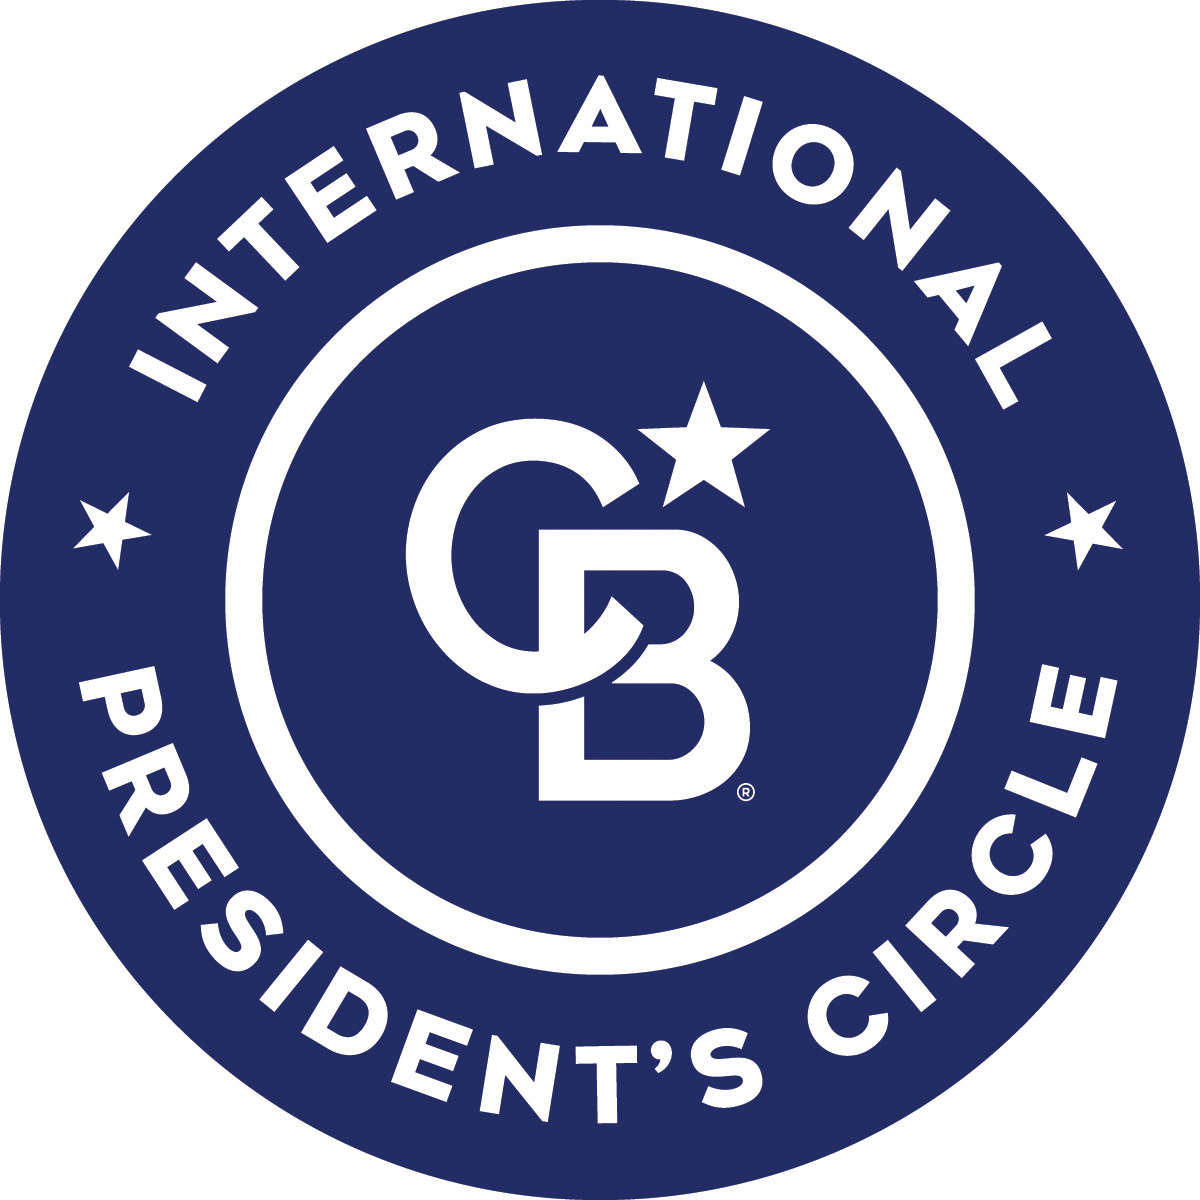 International President's Circle logo awarded to Laurie Pfohl, recognizing excellence in real estate.